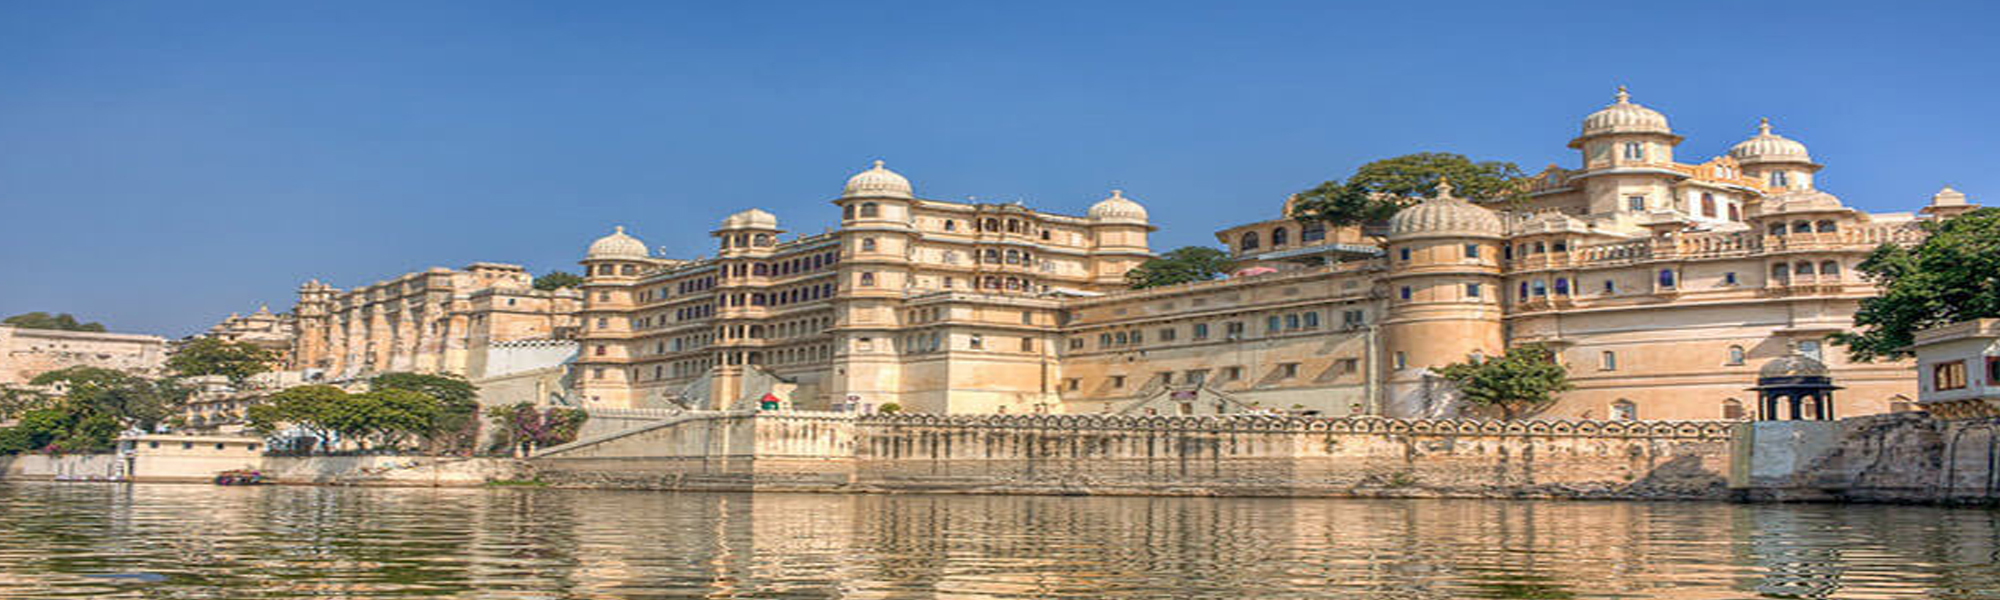 Royal Castles Budget Tours in India 